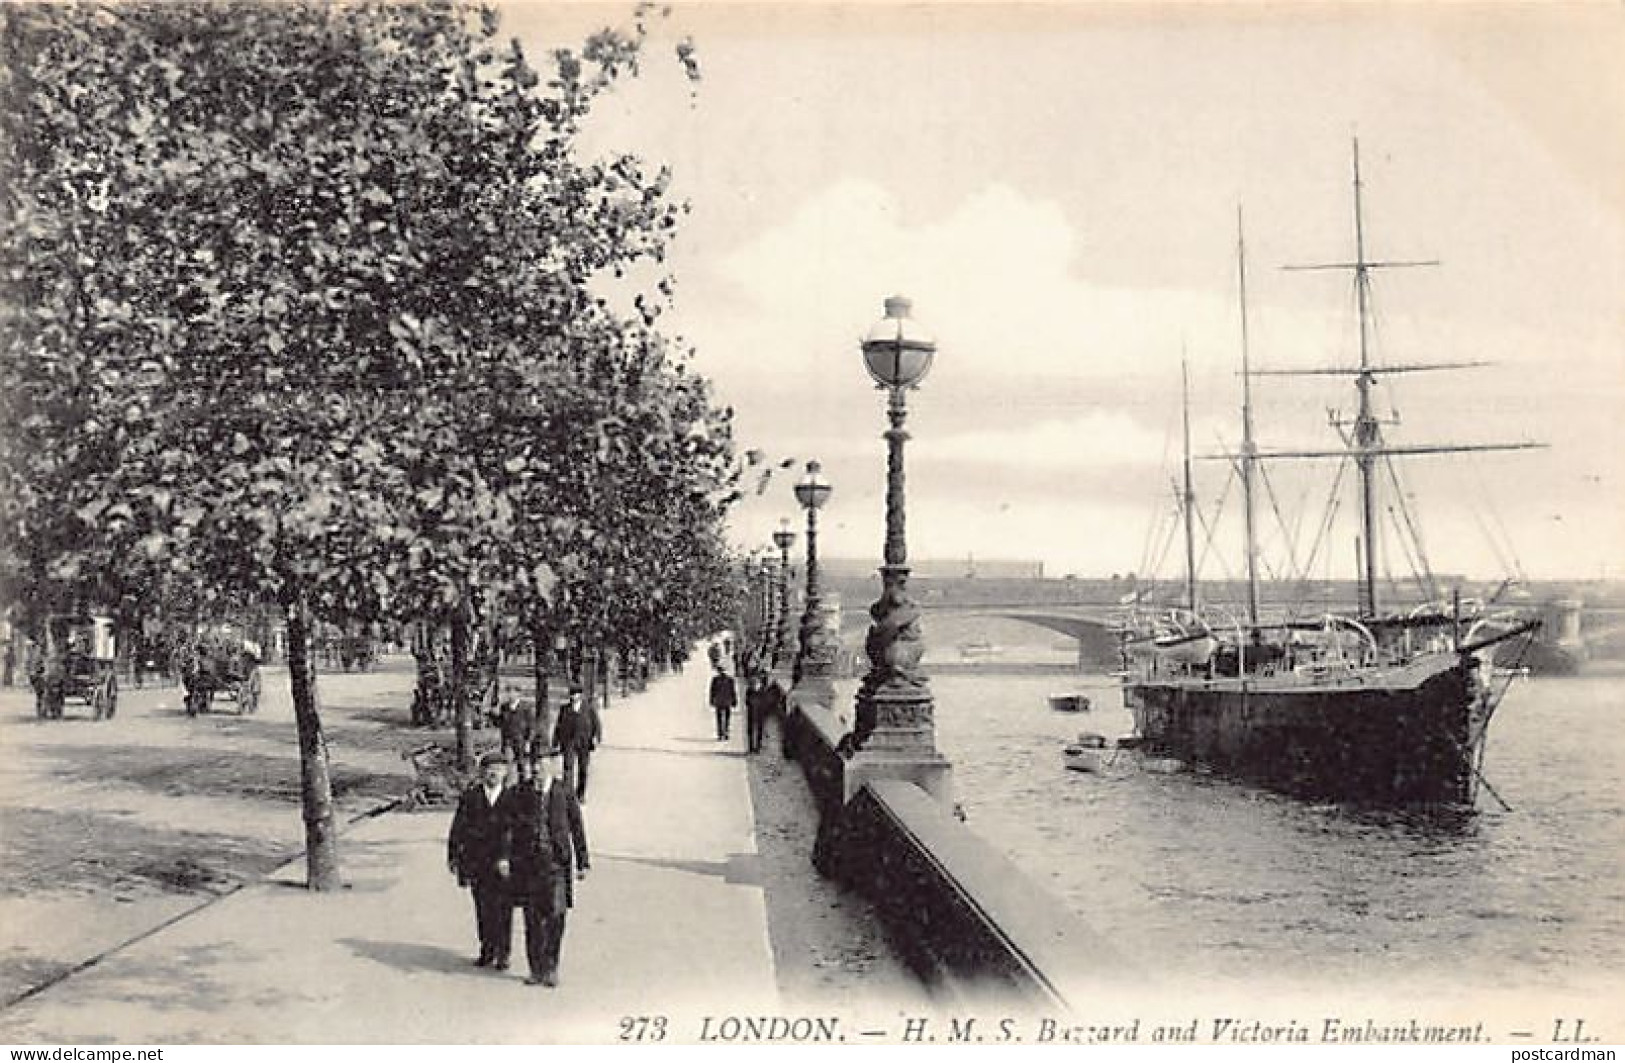 England - LONDON - H.M.S. Buzzard And Victoria Embankment - Publ. LL Levy 273 - River Thames